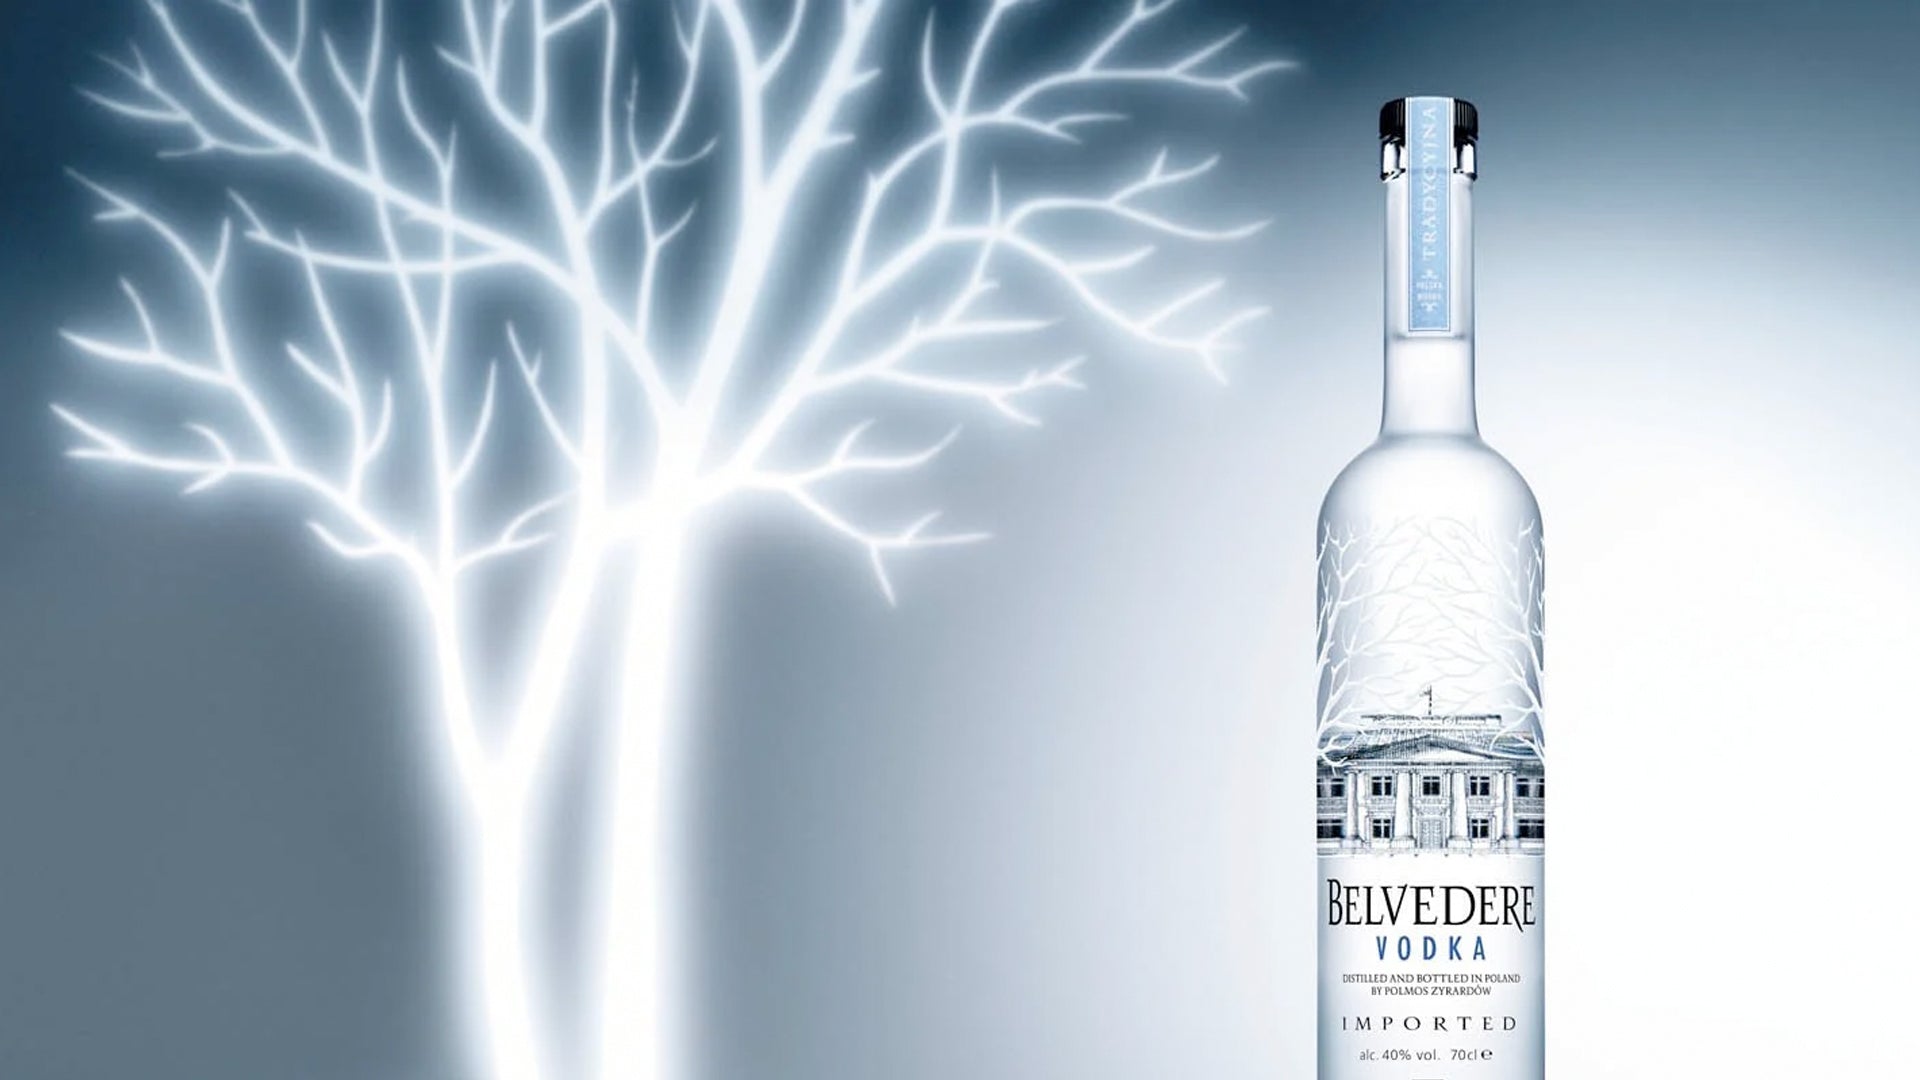 5+ Fun Facts About Vodka You Should Know